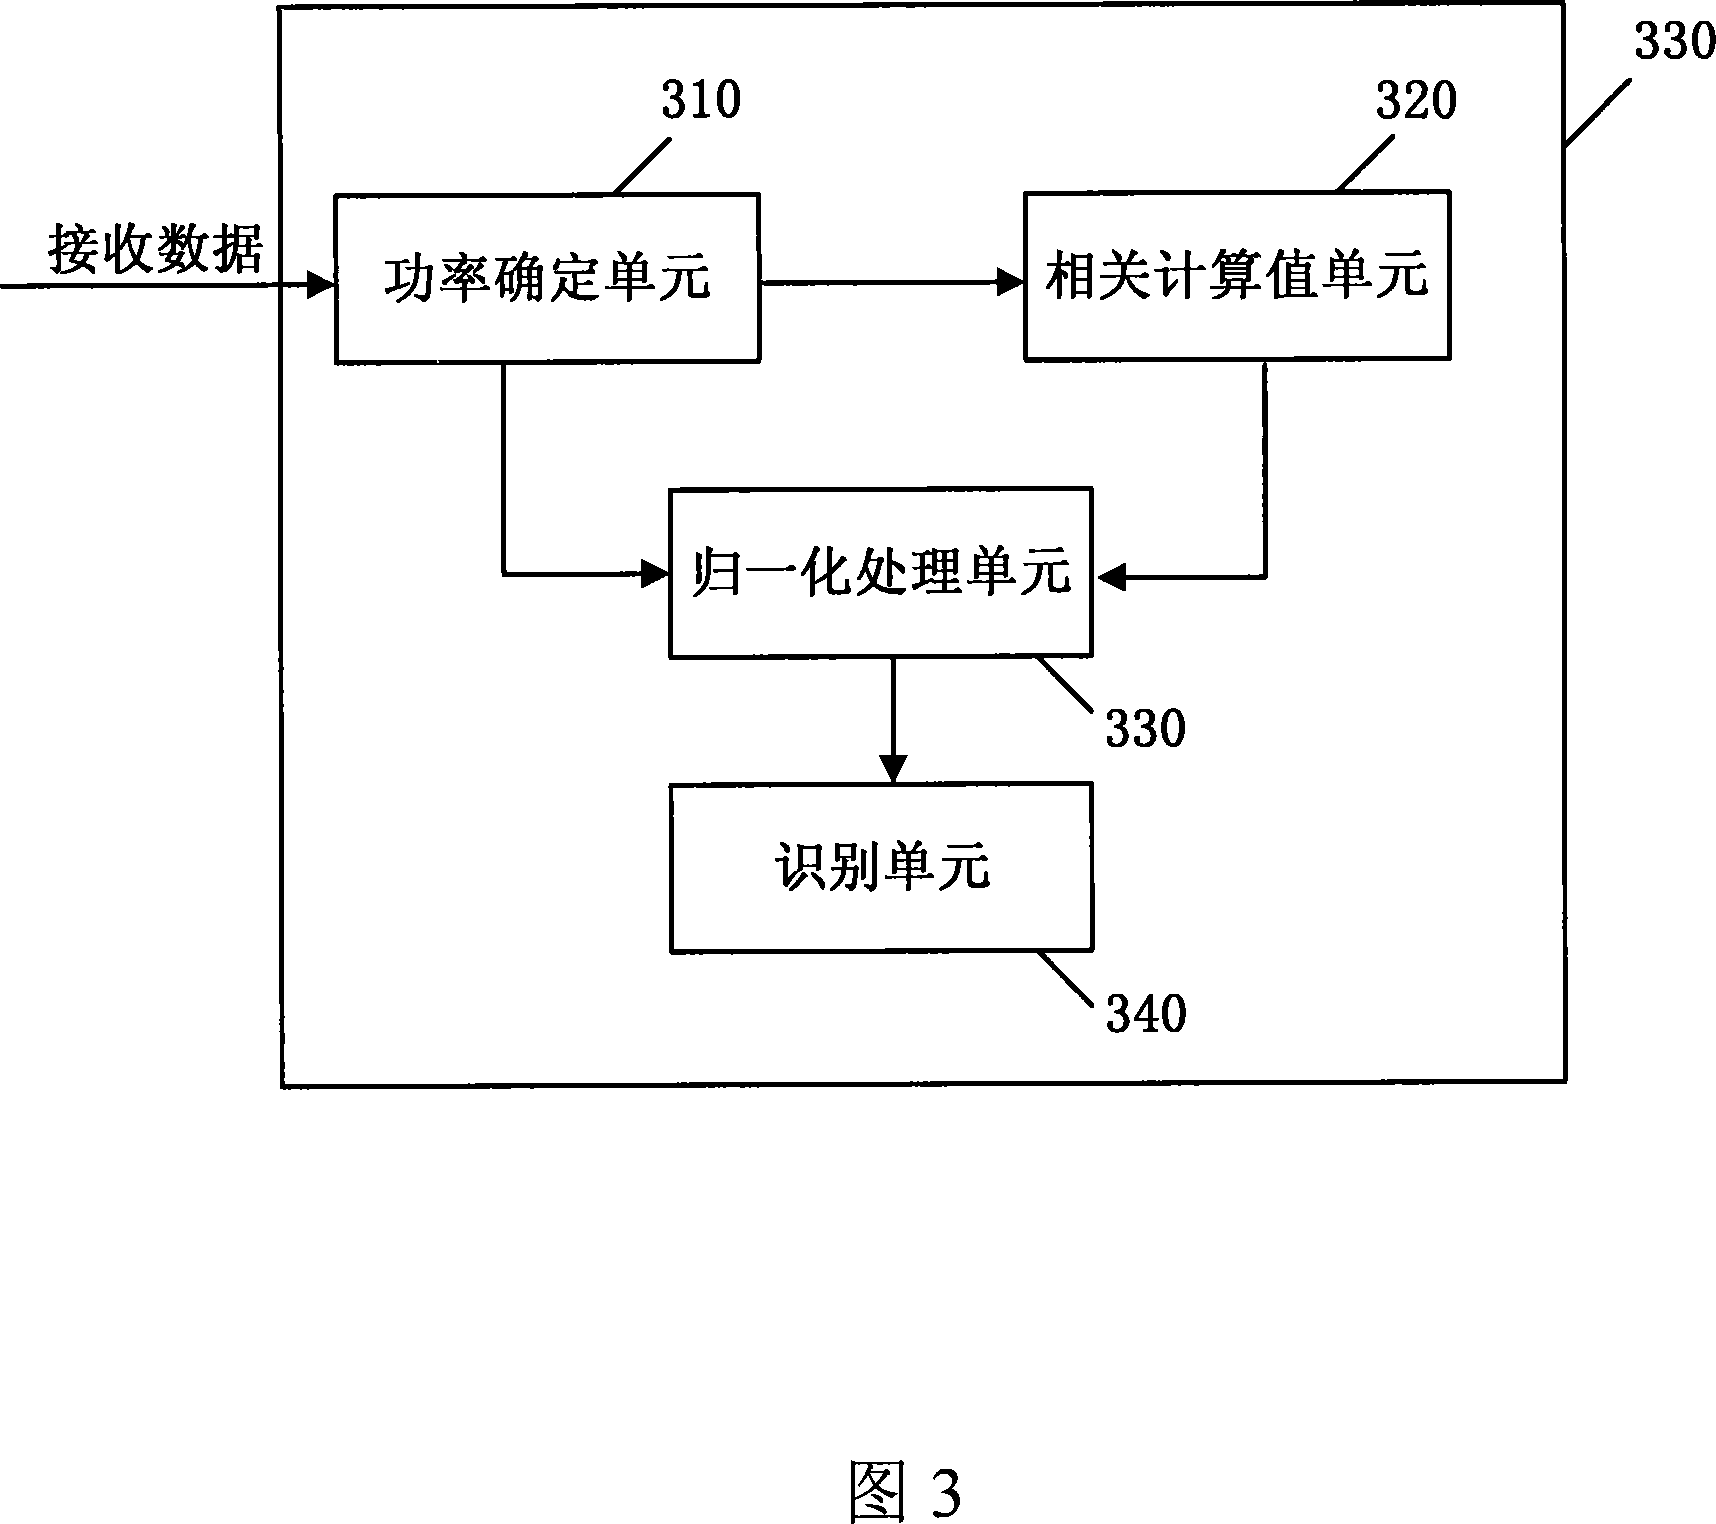 A downlink synchronization method and device for time division multi-address system